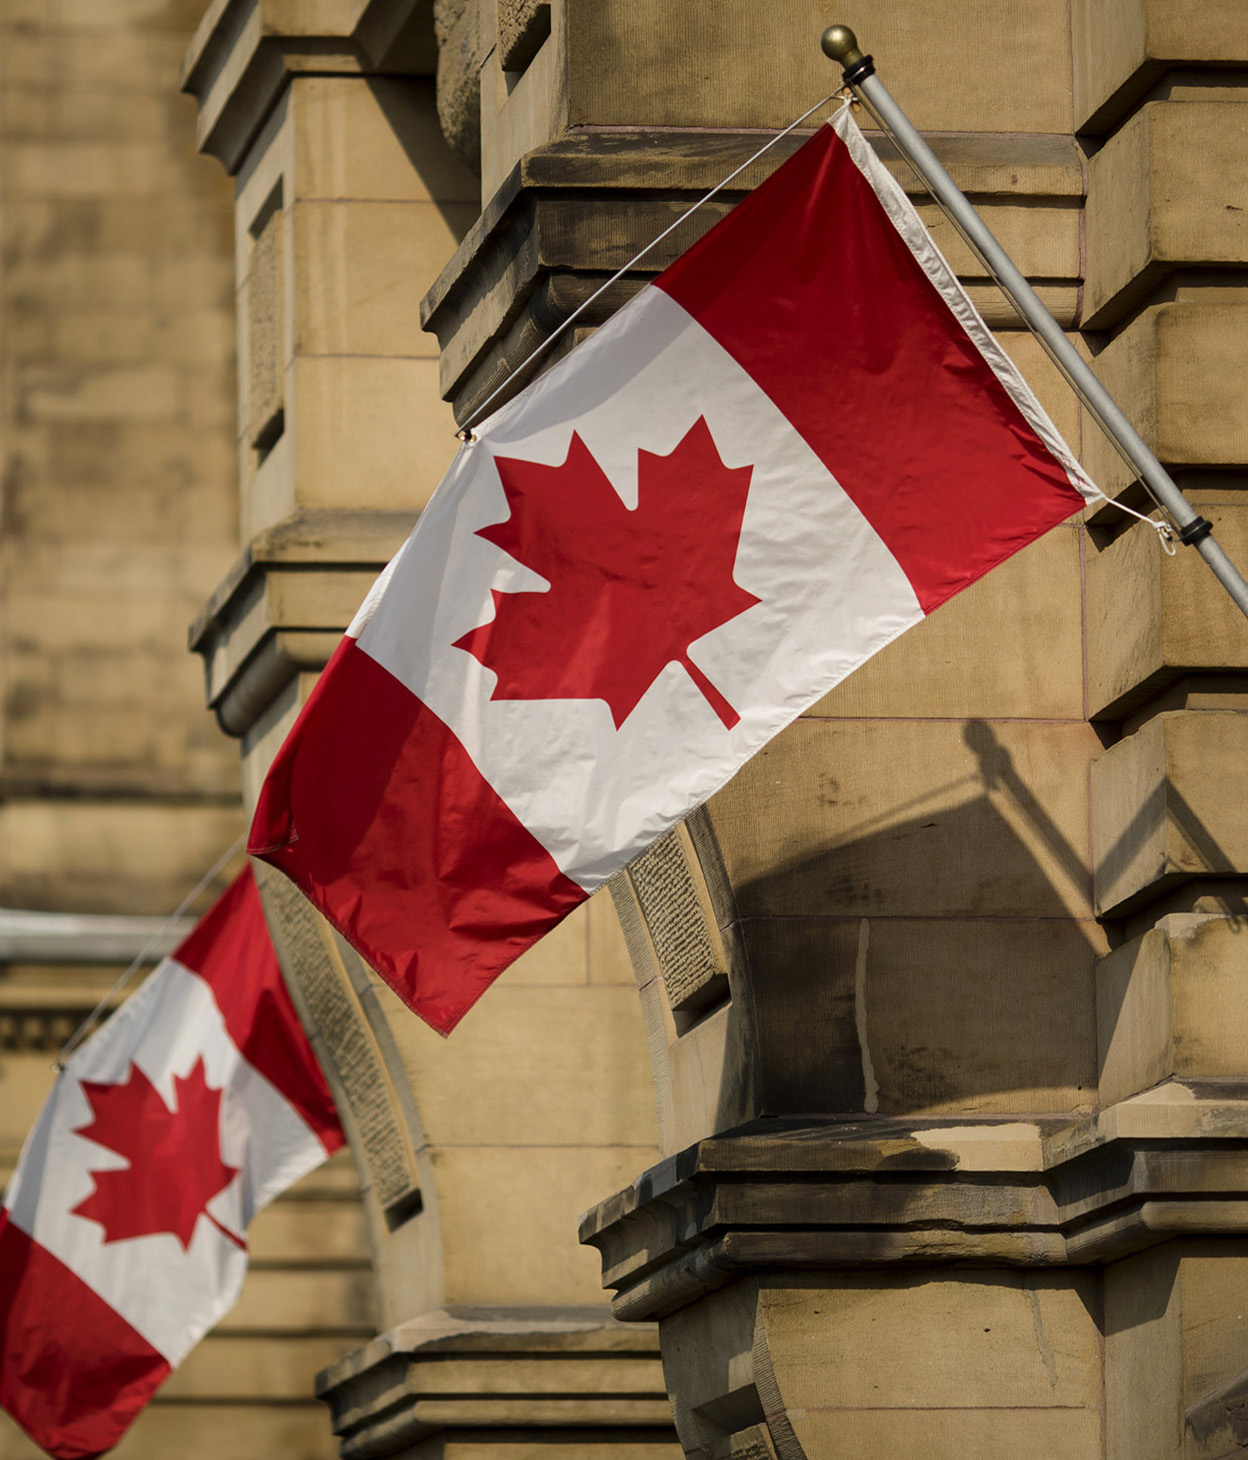 Canadian flags hang on display outside the Office of the Prime Minister and Privy Council building in Ottawa, Ontario, Canada.